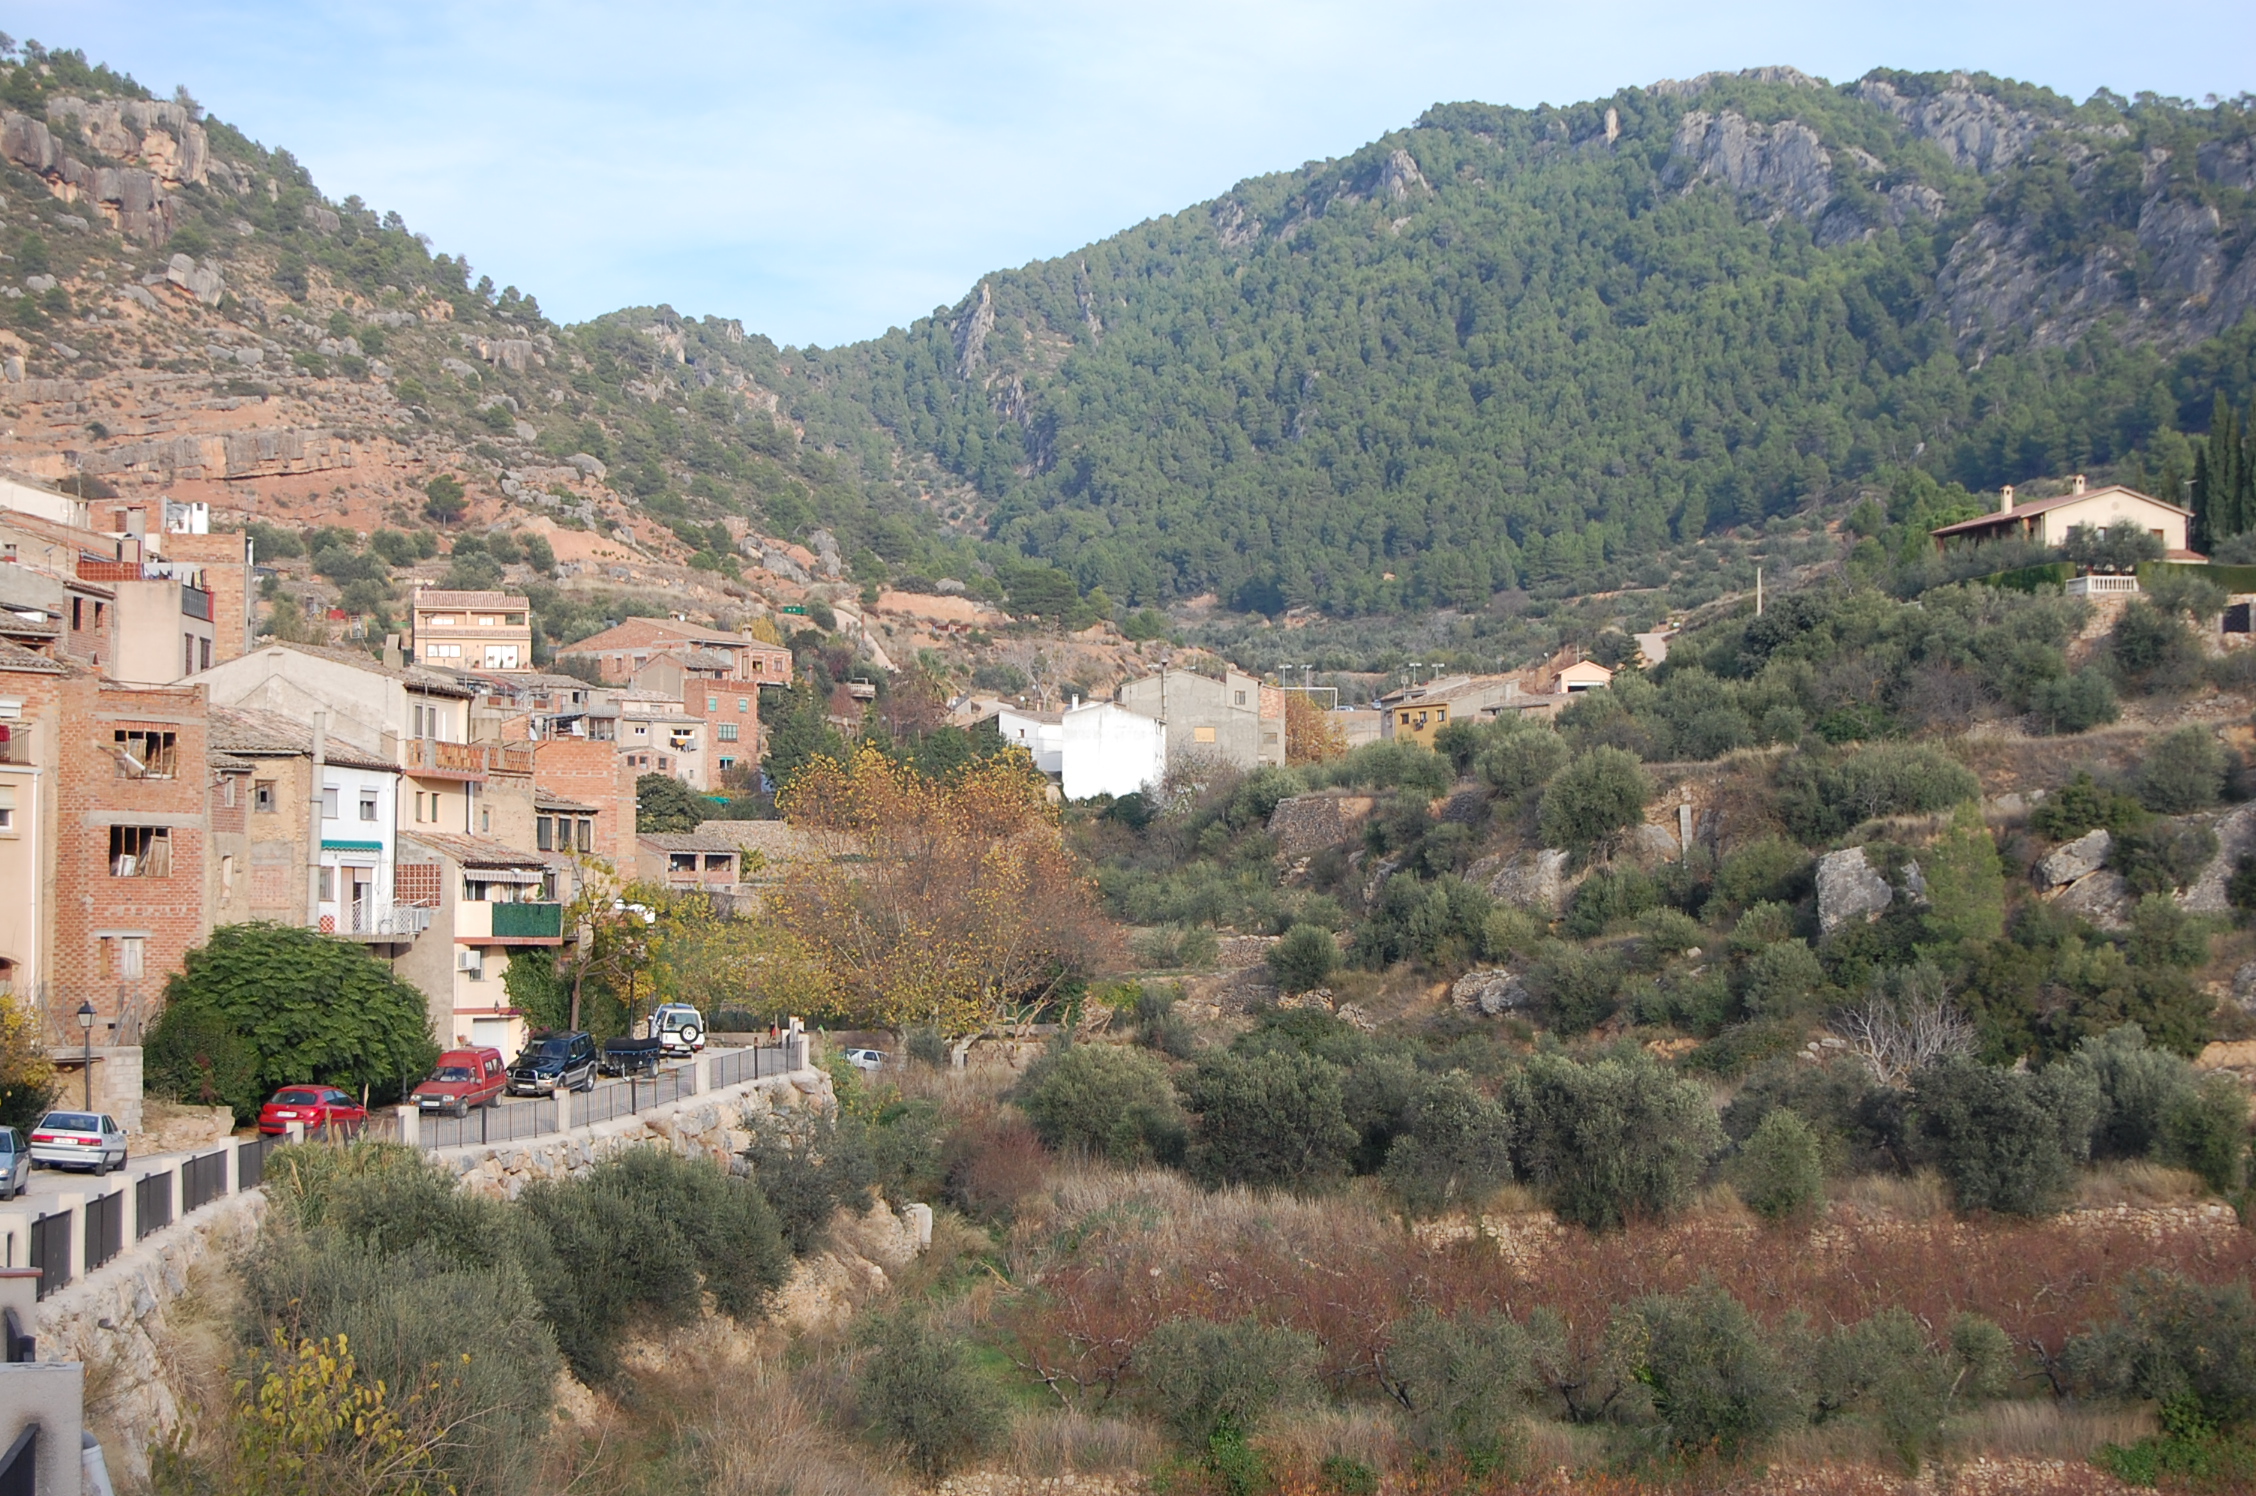 houses built into a hillside with many trees